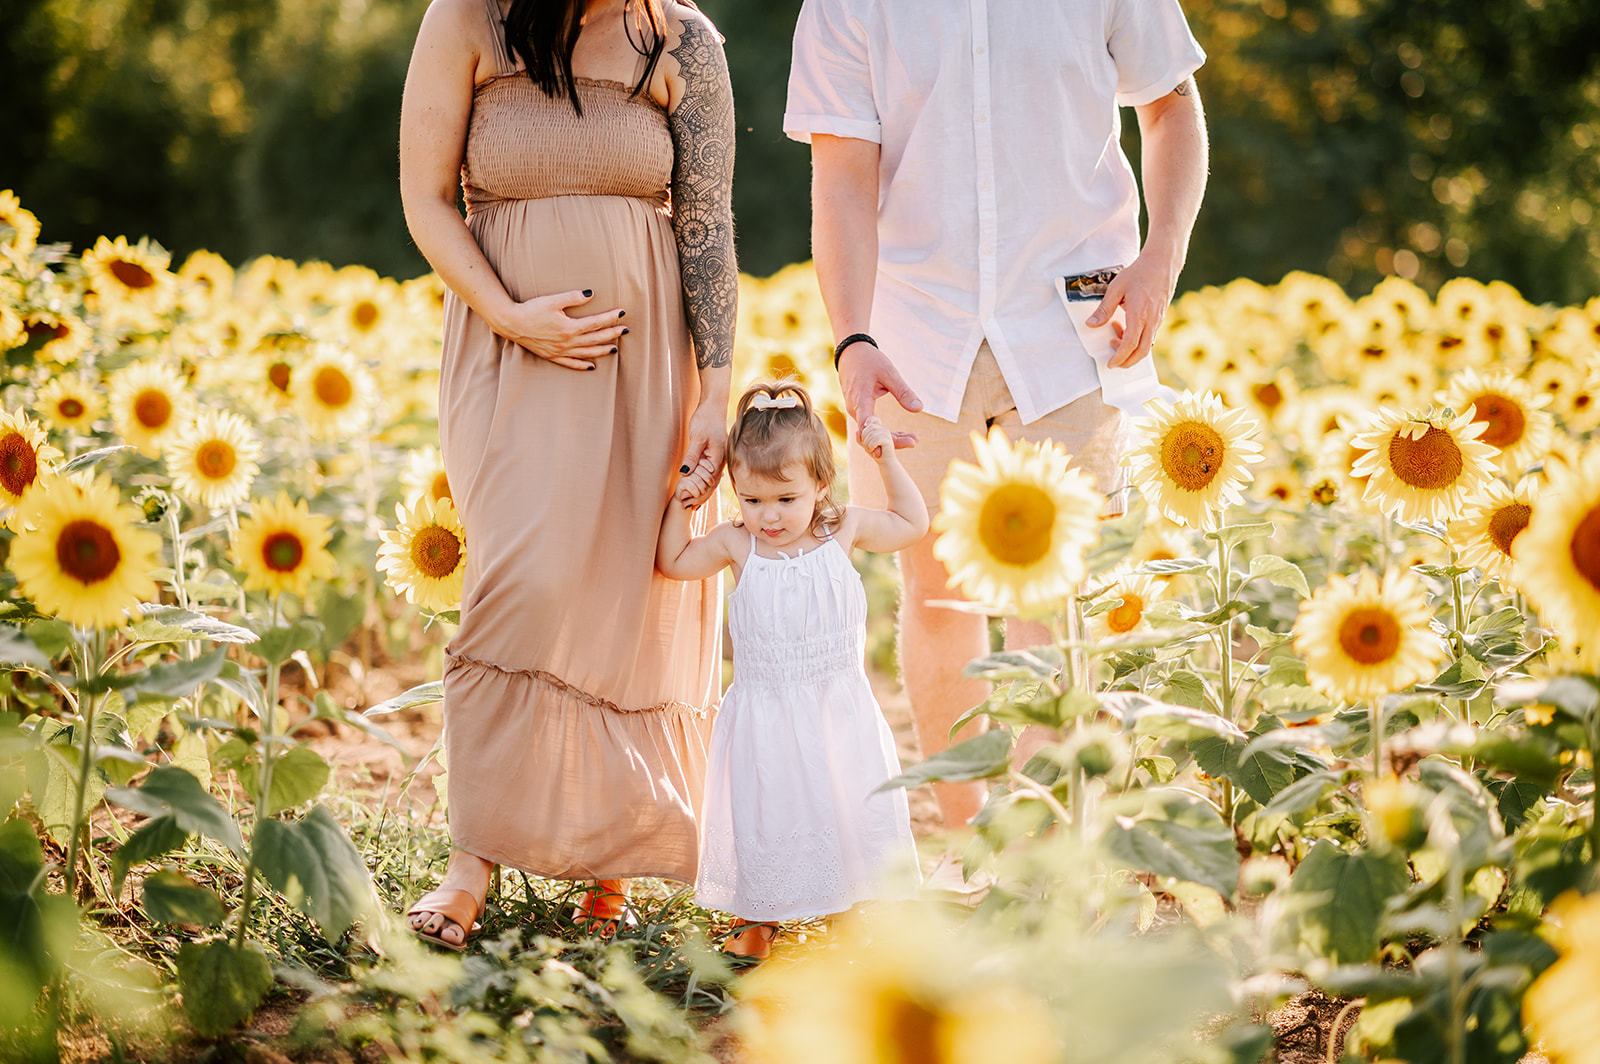 A pregnant mother and her husband lead their toddler daughter through a field of sunflowers by holding her hands Winston-Salem Fall Activities